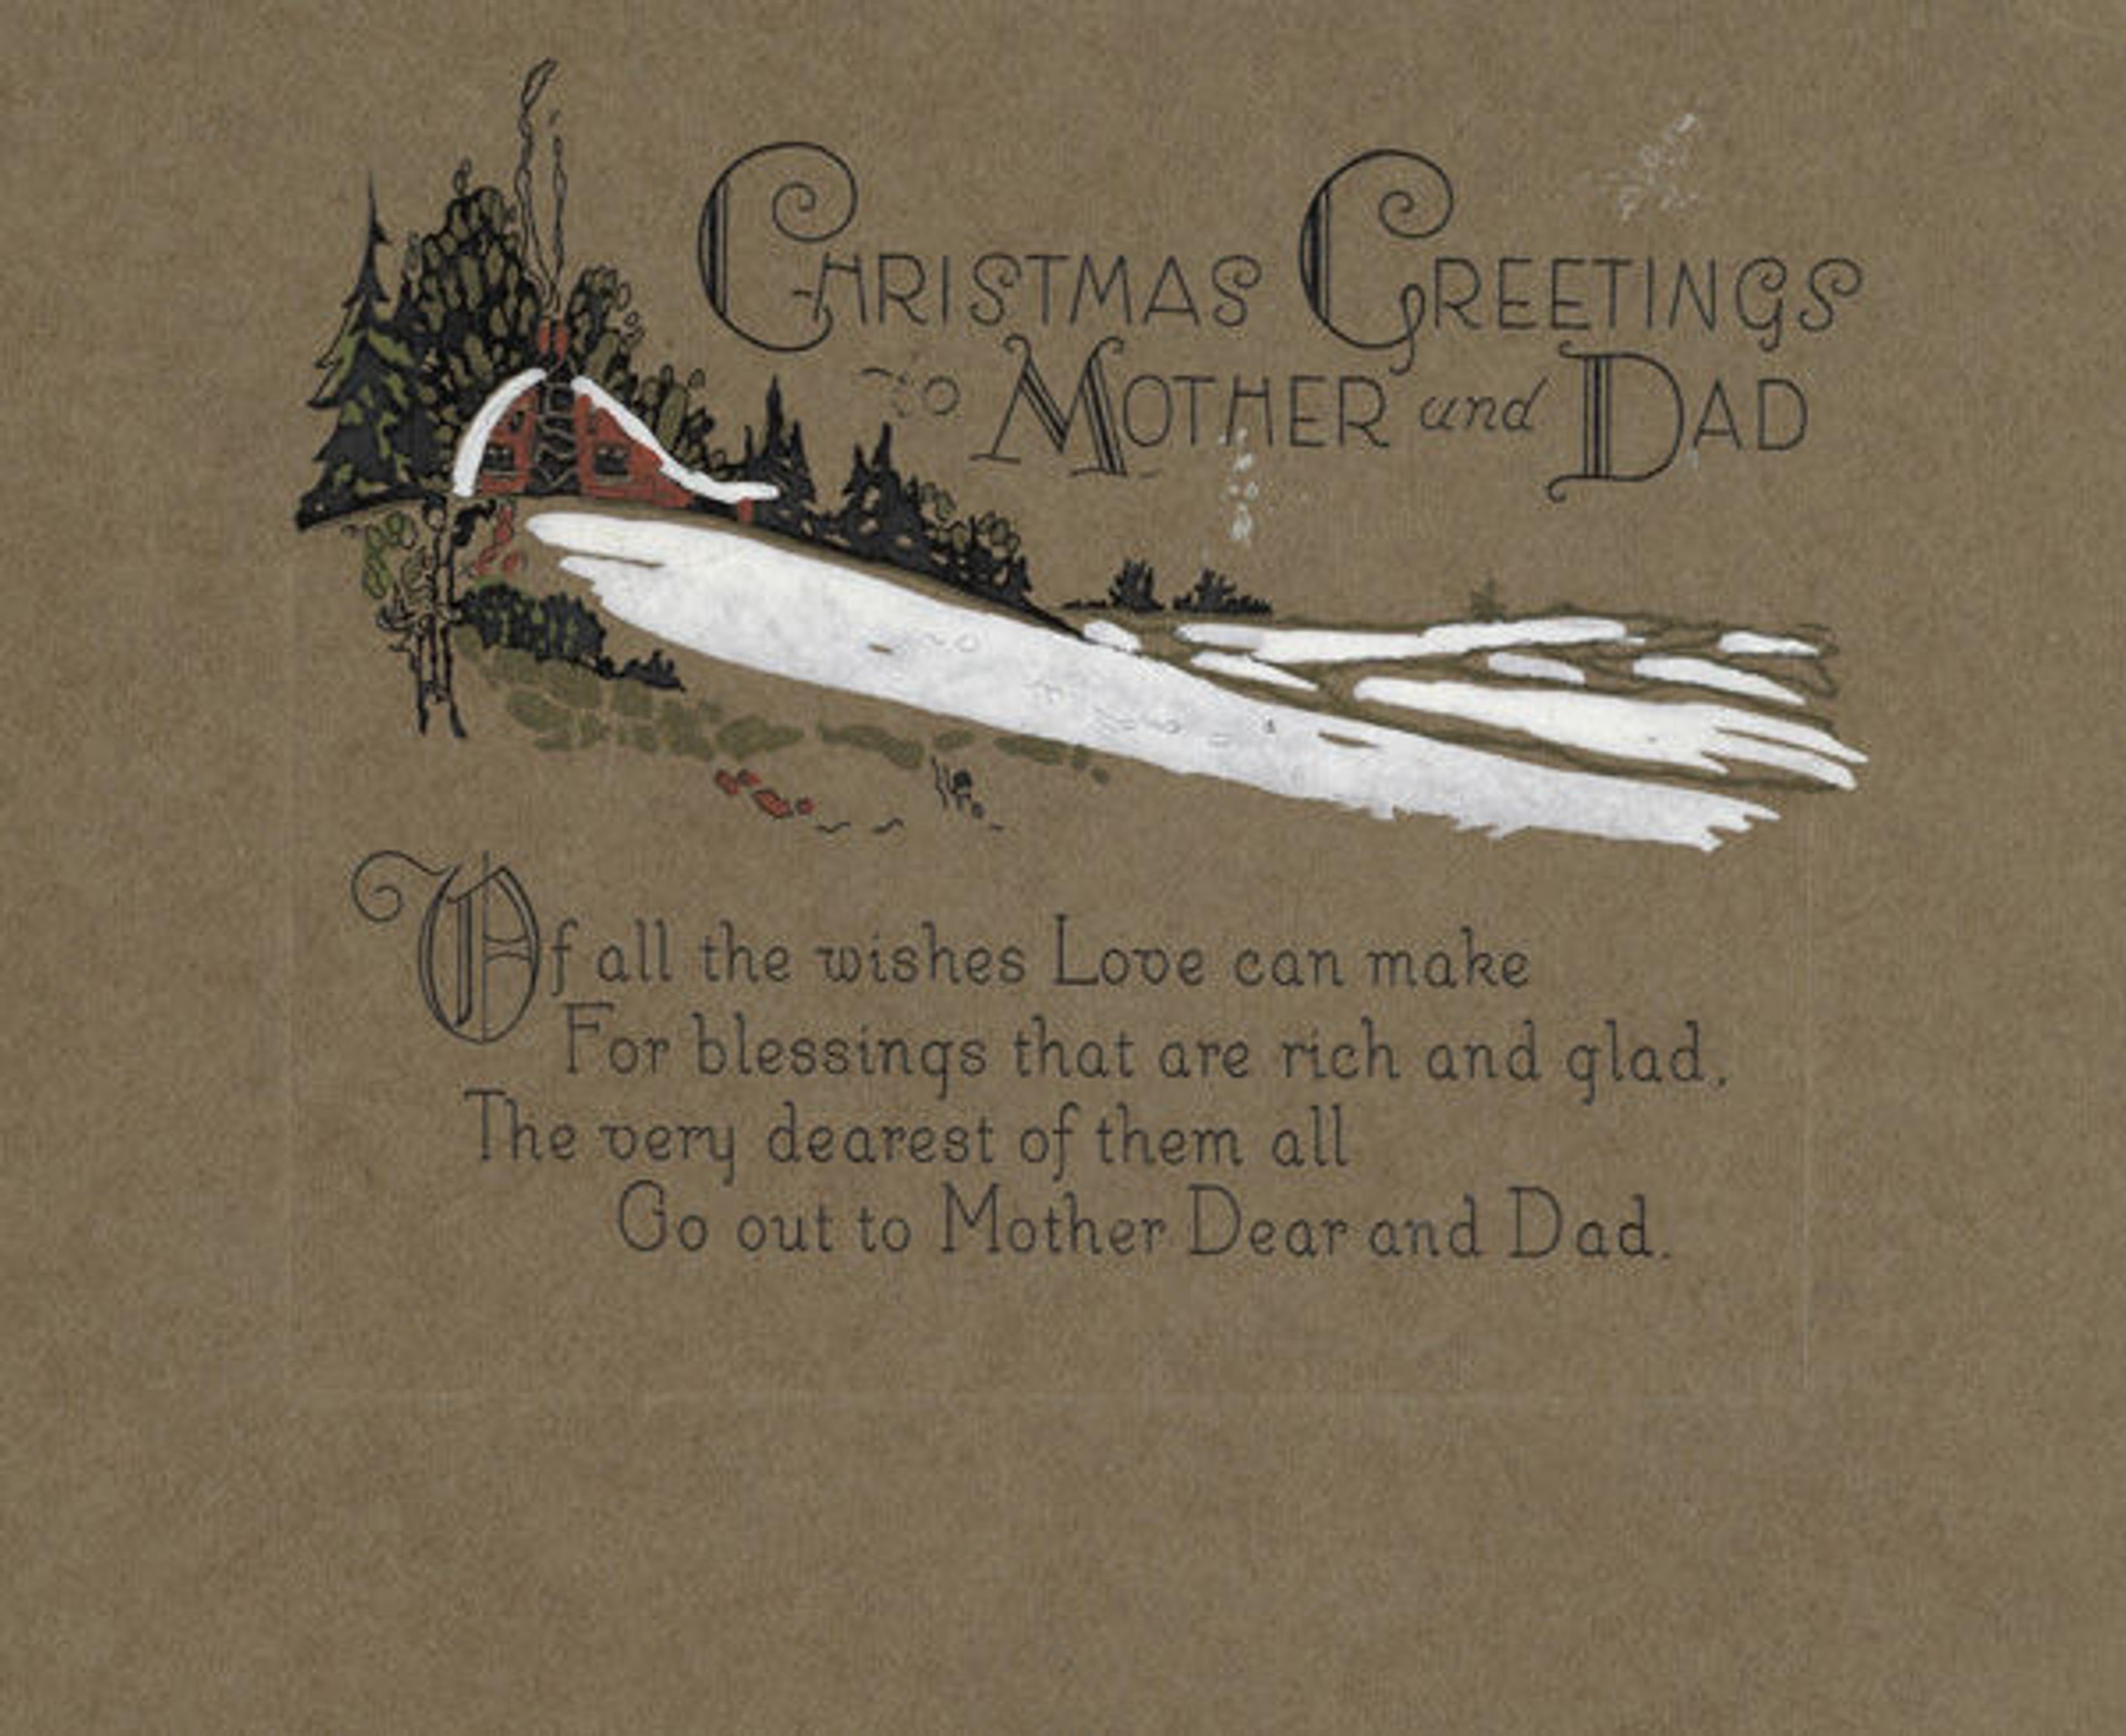 Christmas Greetings for Mother and Dad, 1920s